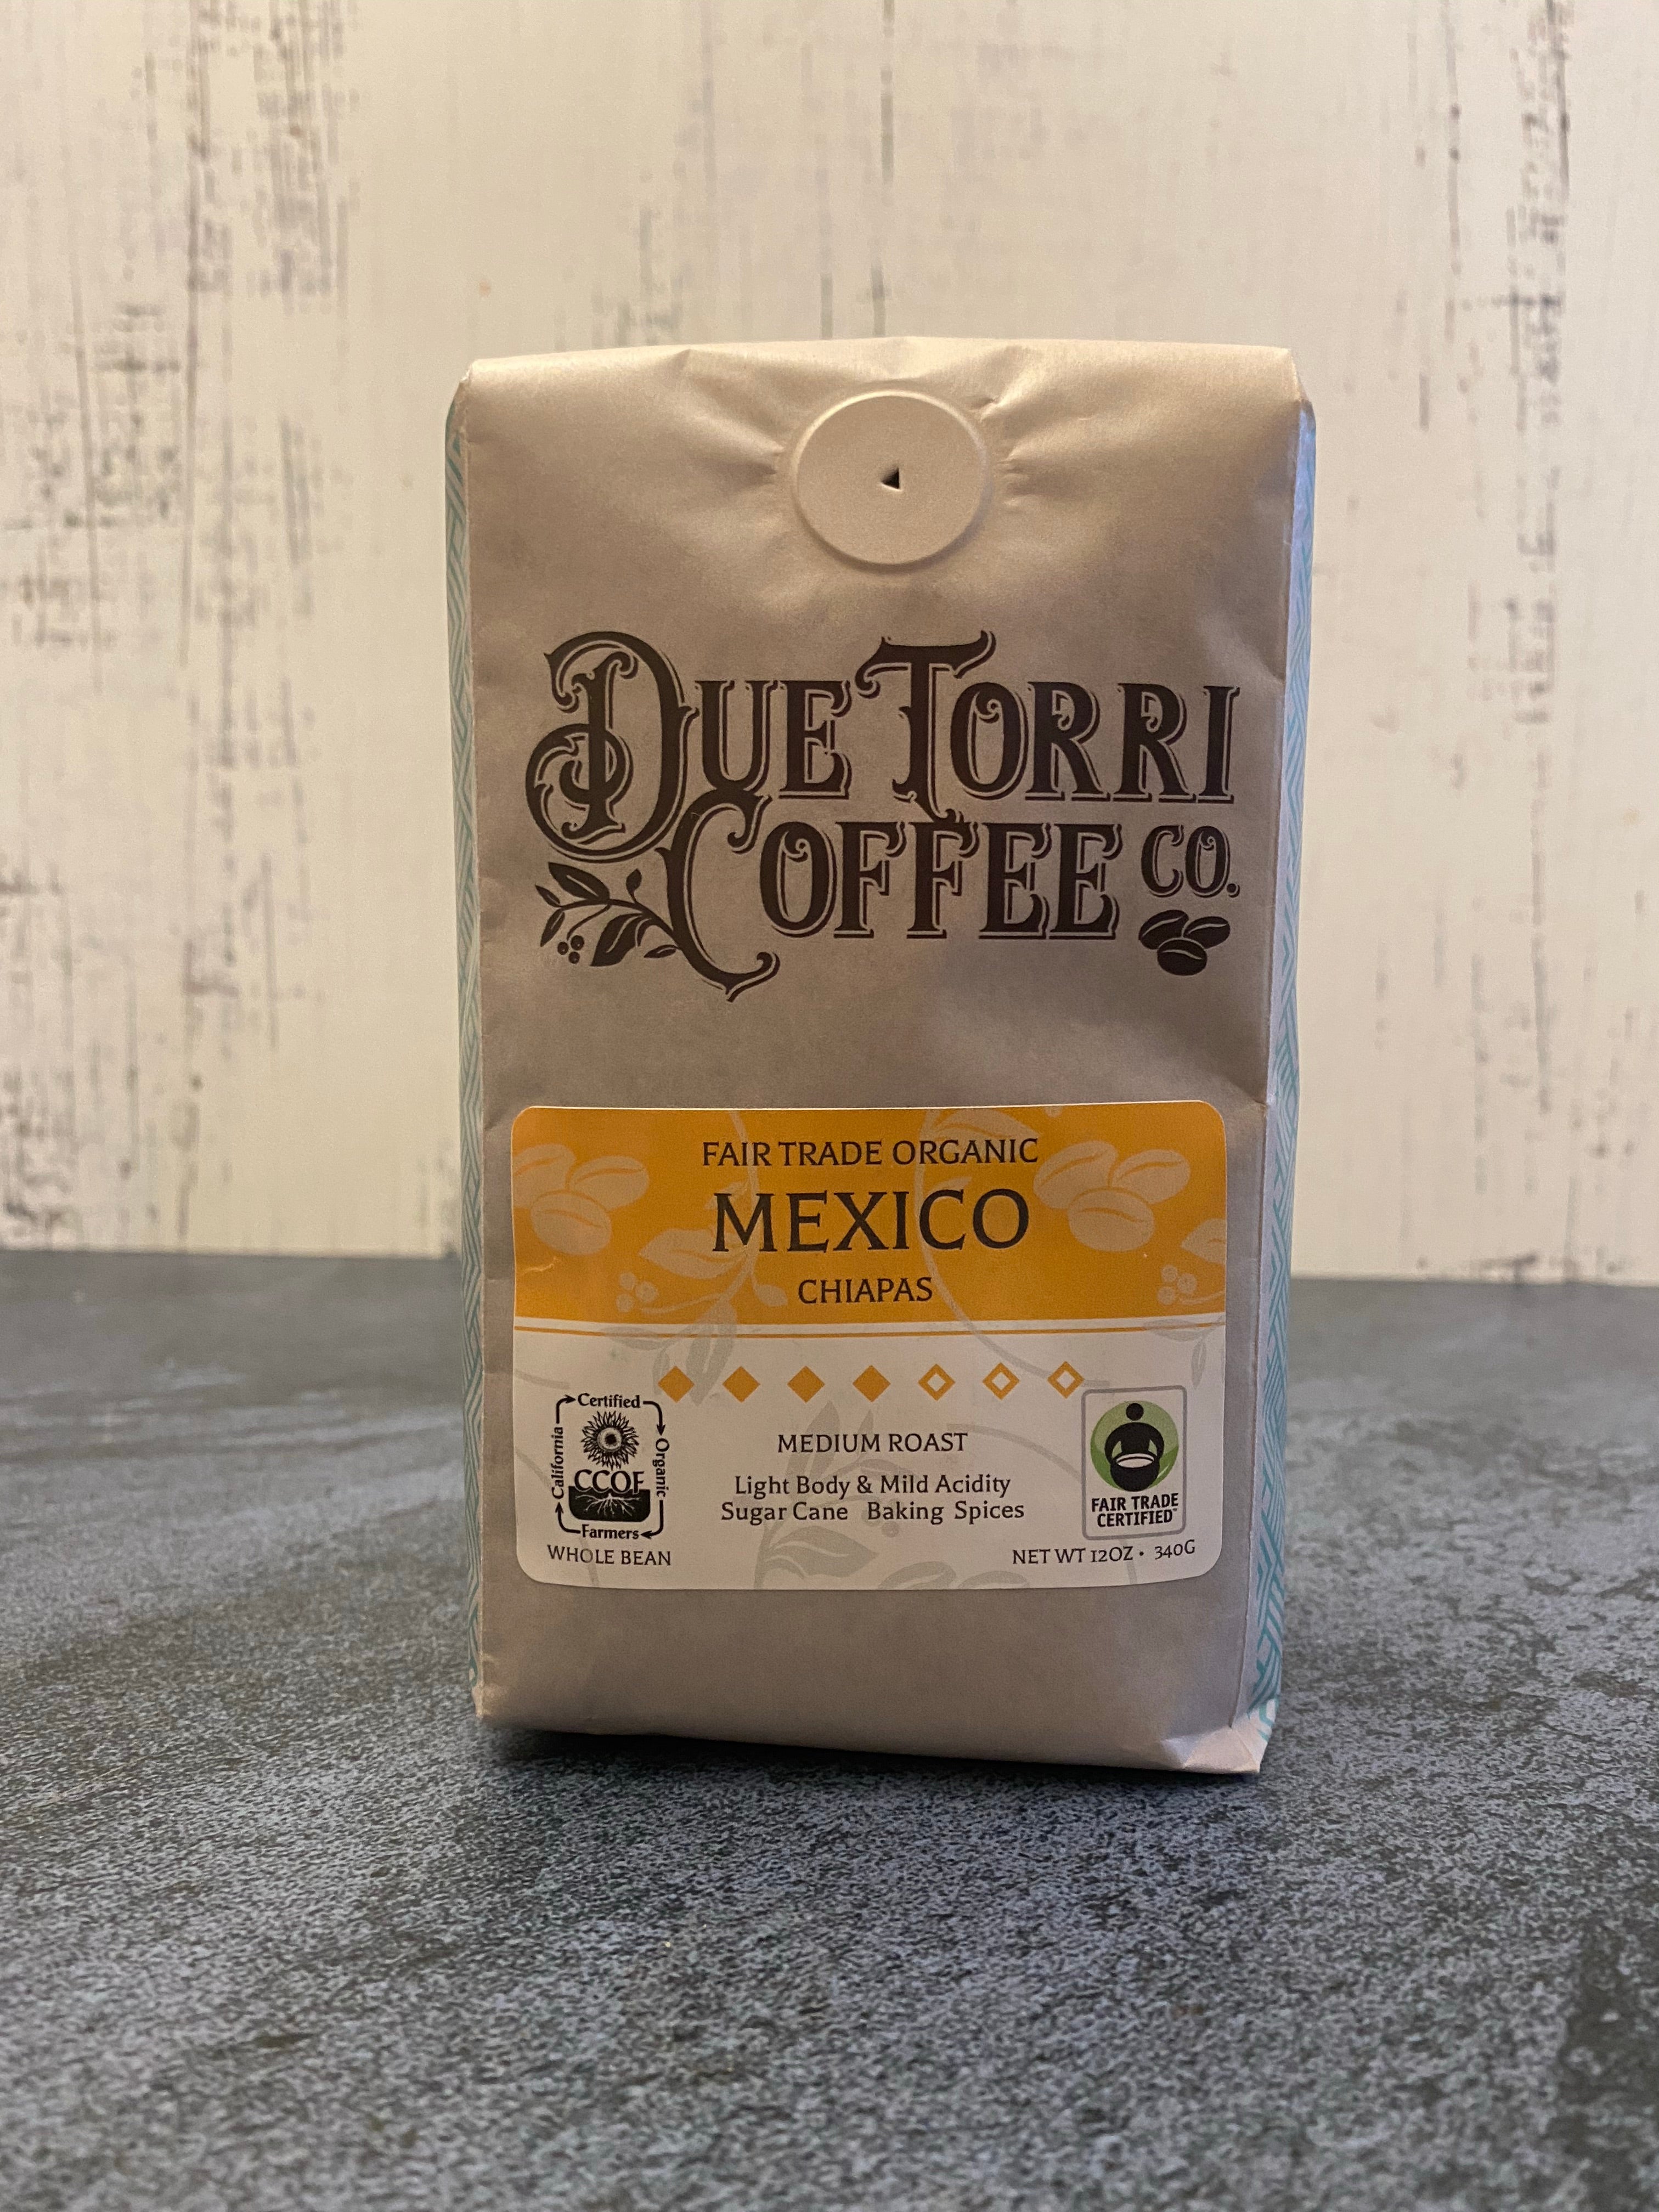 Mexico blend coffee